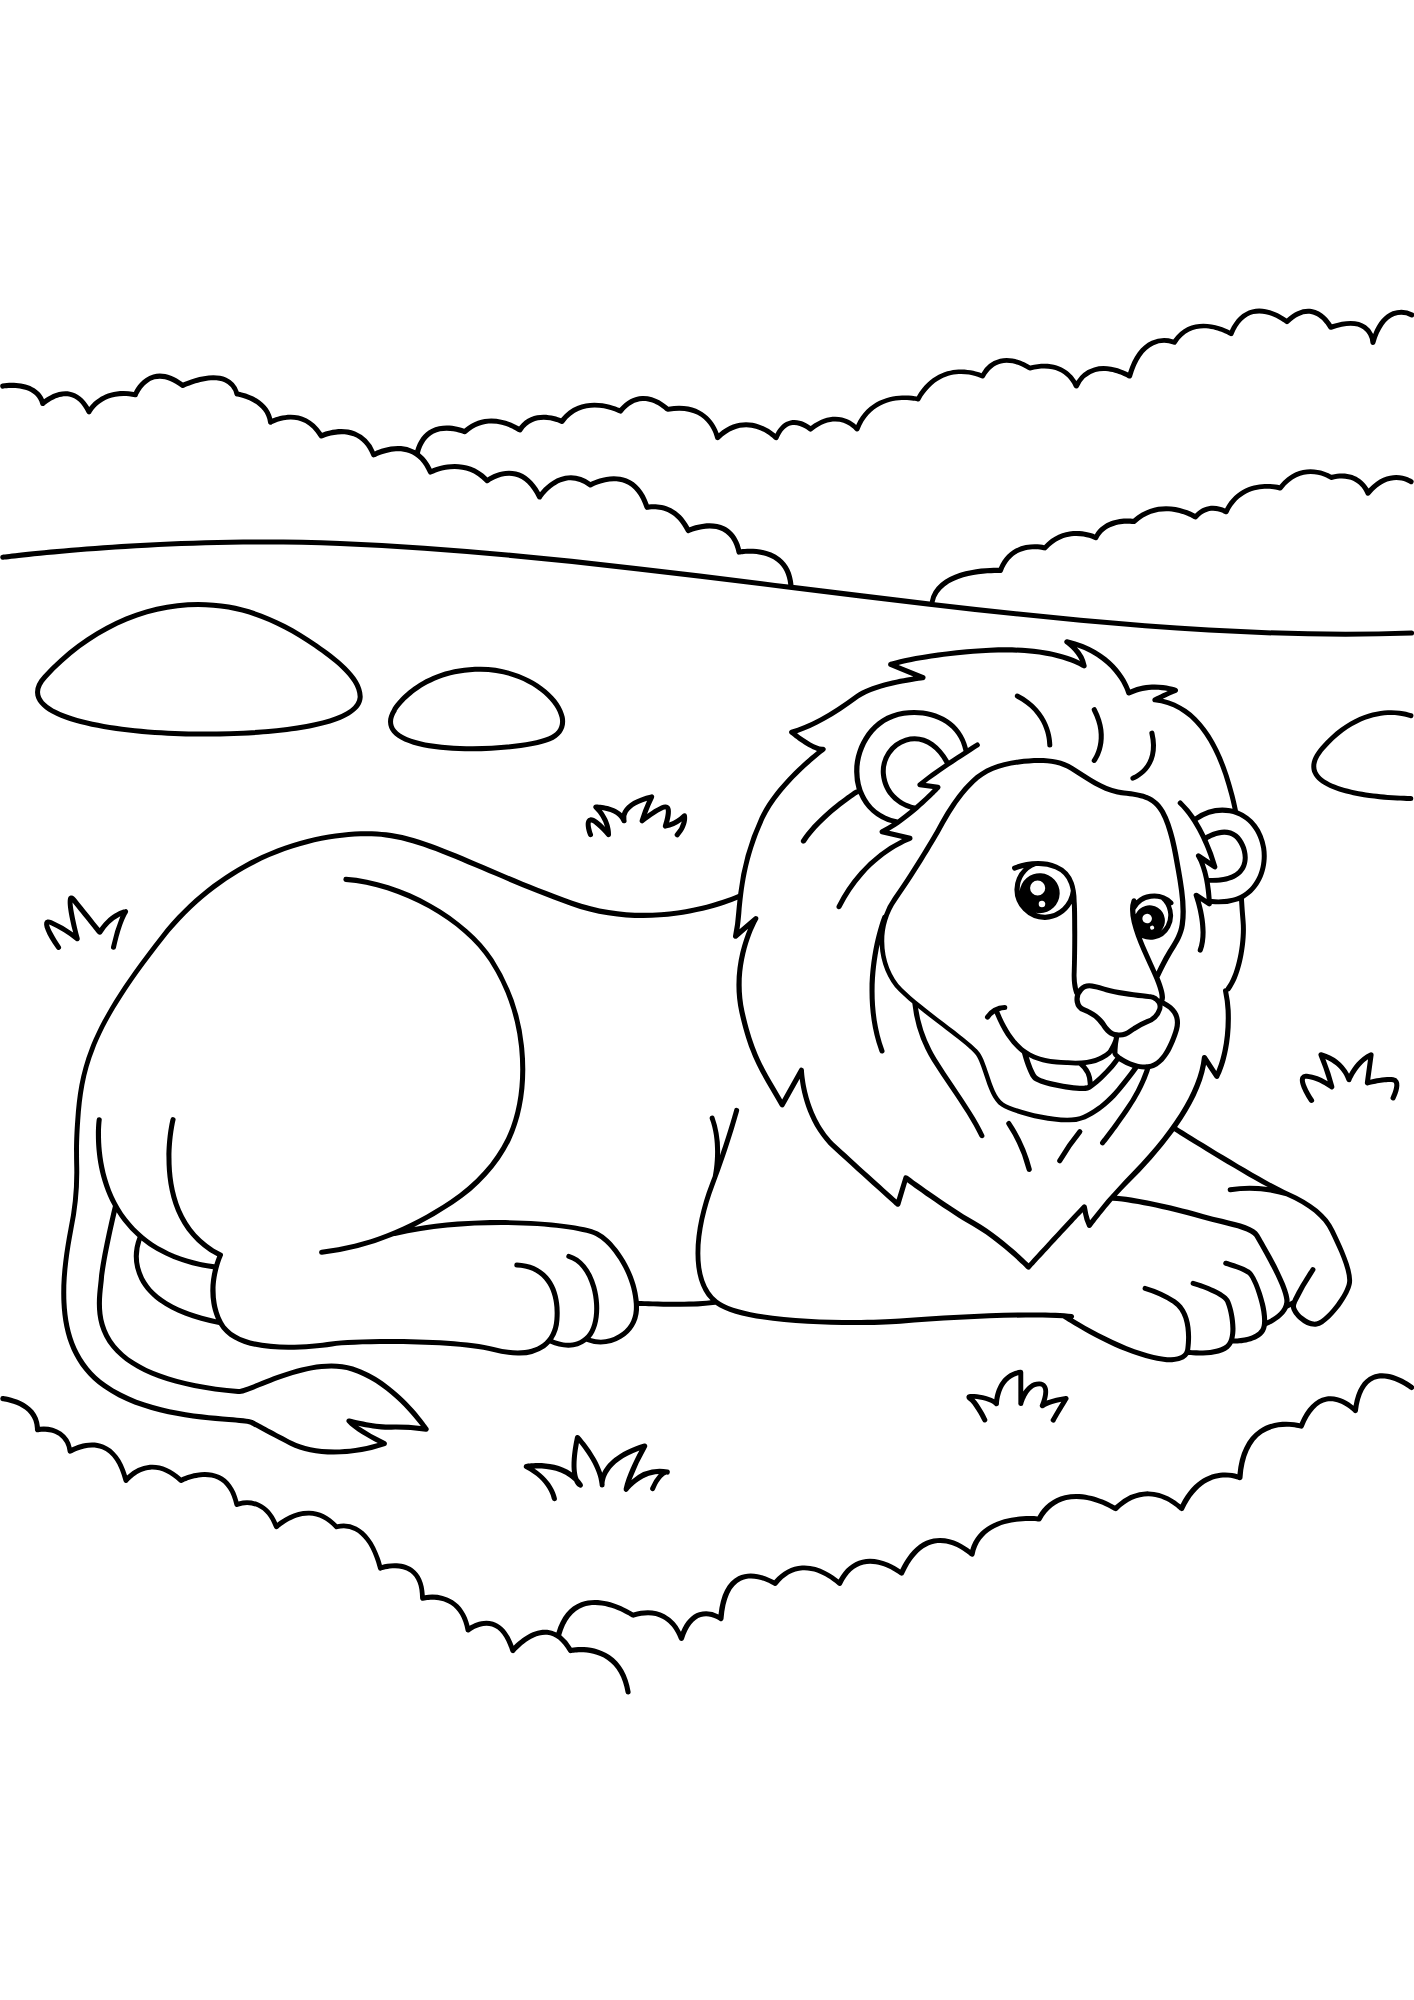 Lion Drawing For Kids Coloring Page